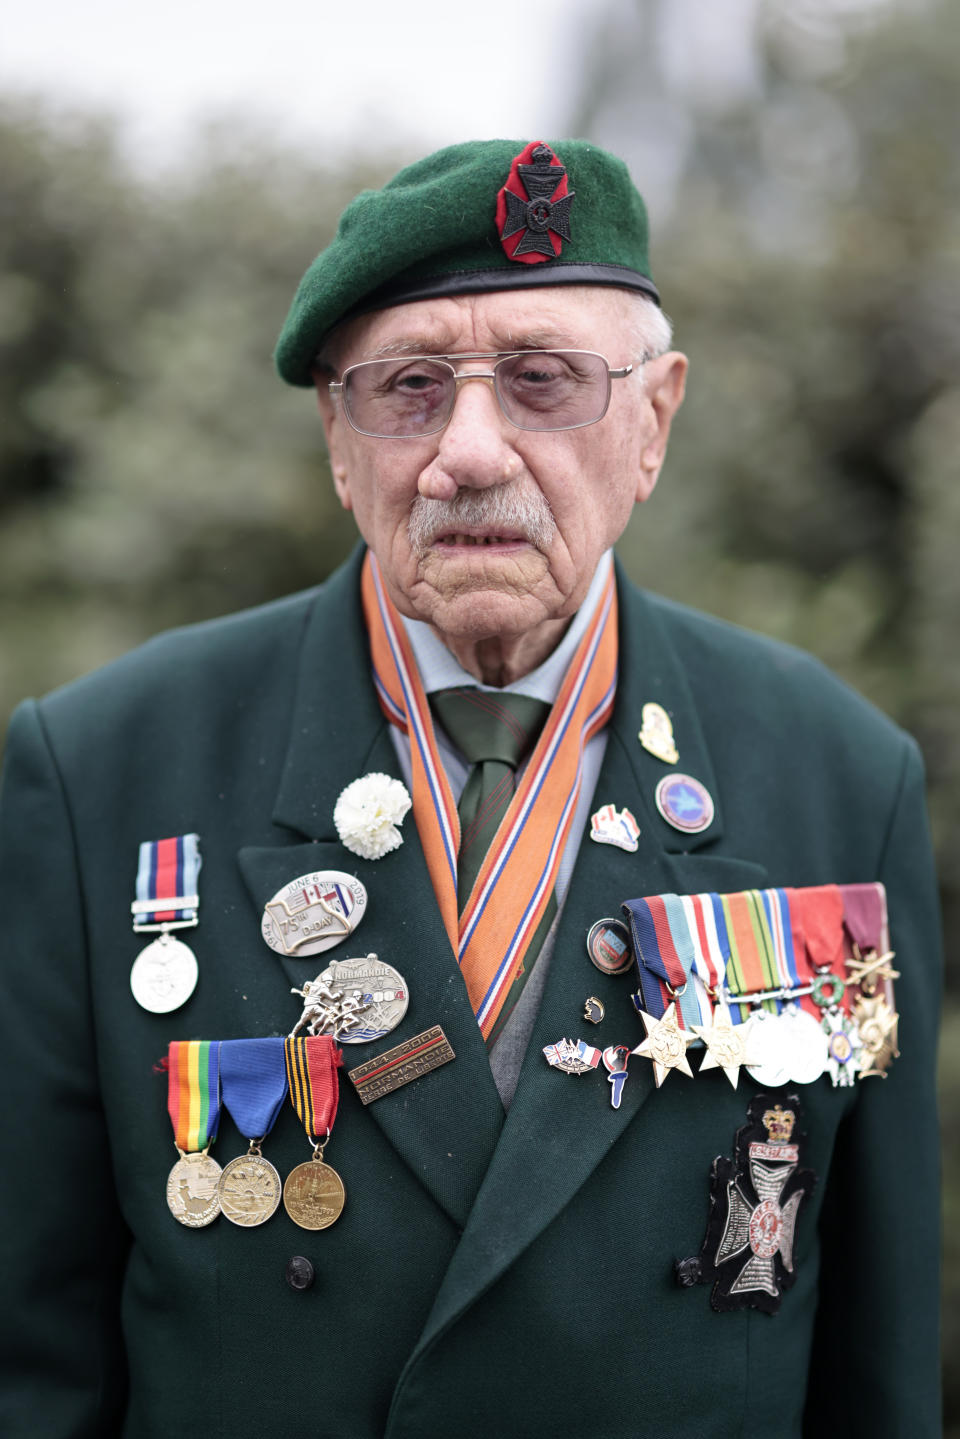 British veteran Richard Forrester of the Kings Royal Rifle Corps arrives at the ceremony at Pegasus Bridge, in Ranville, Normandy, Sunday, June, 5, 2022. On Monday, the Normandy American Cemetery and Memorial, home to the gravesites of 9,386 who died fighting on D-Day and in the operations that followed, will host U.S. veterans and thousands of visitors in its first major public ceremony since 2019. (AP Photo/Jeremias Gonzalez)